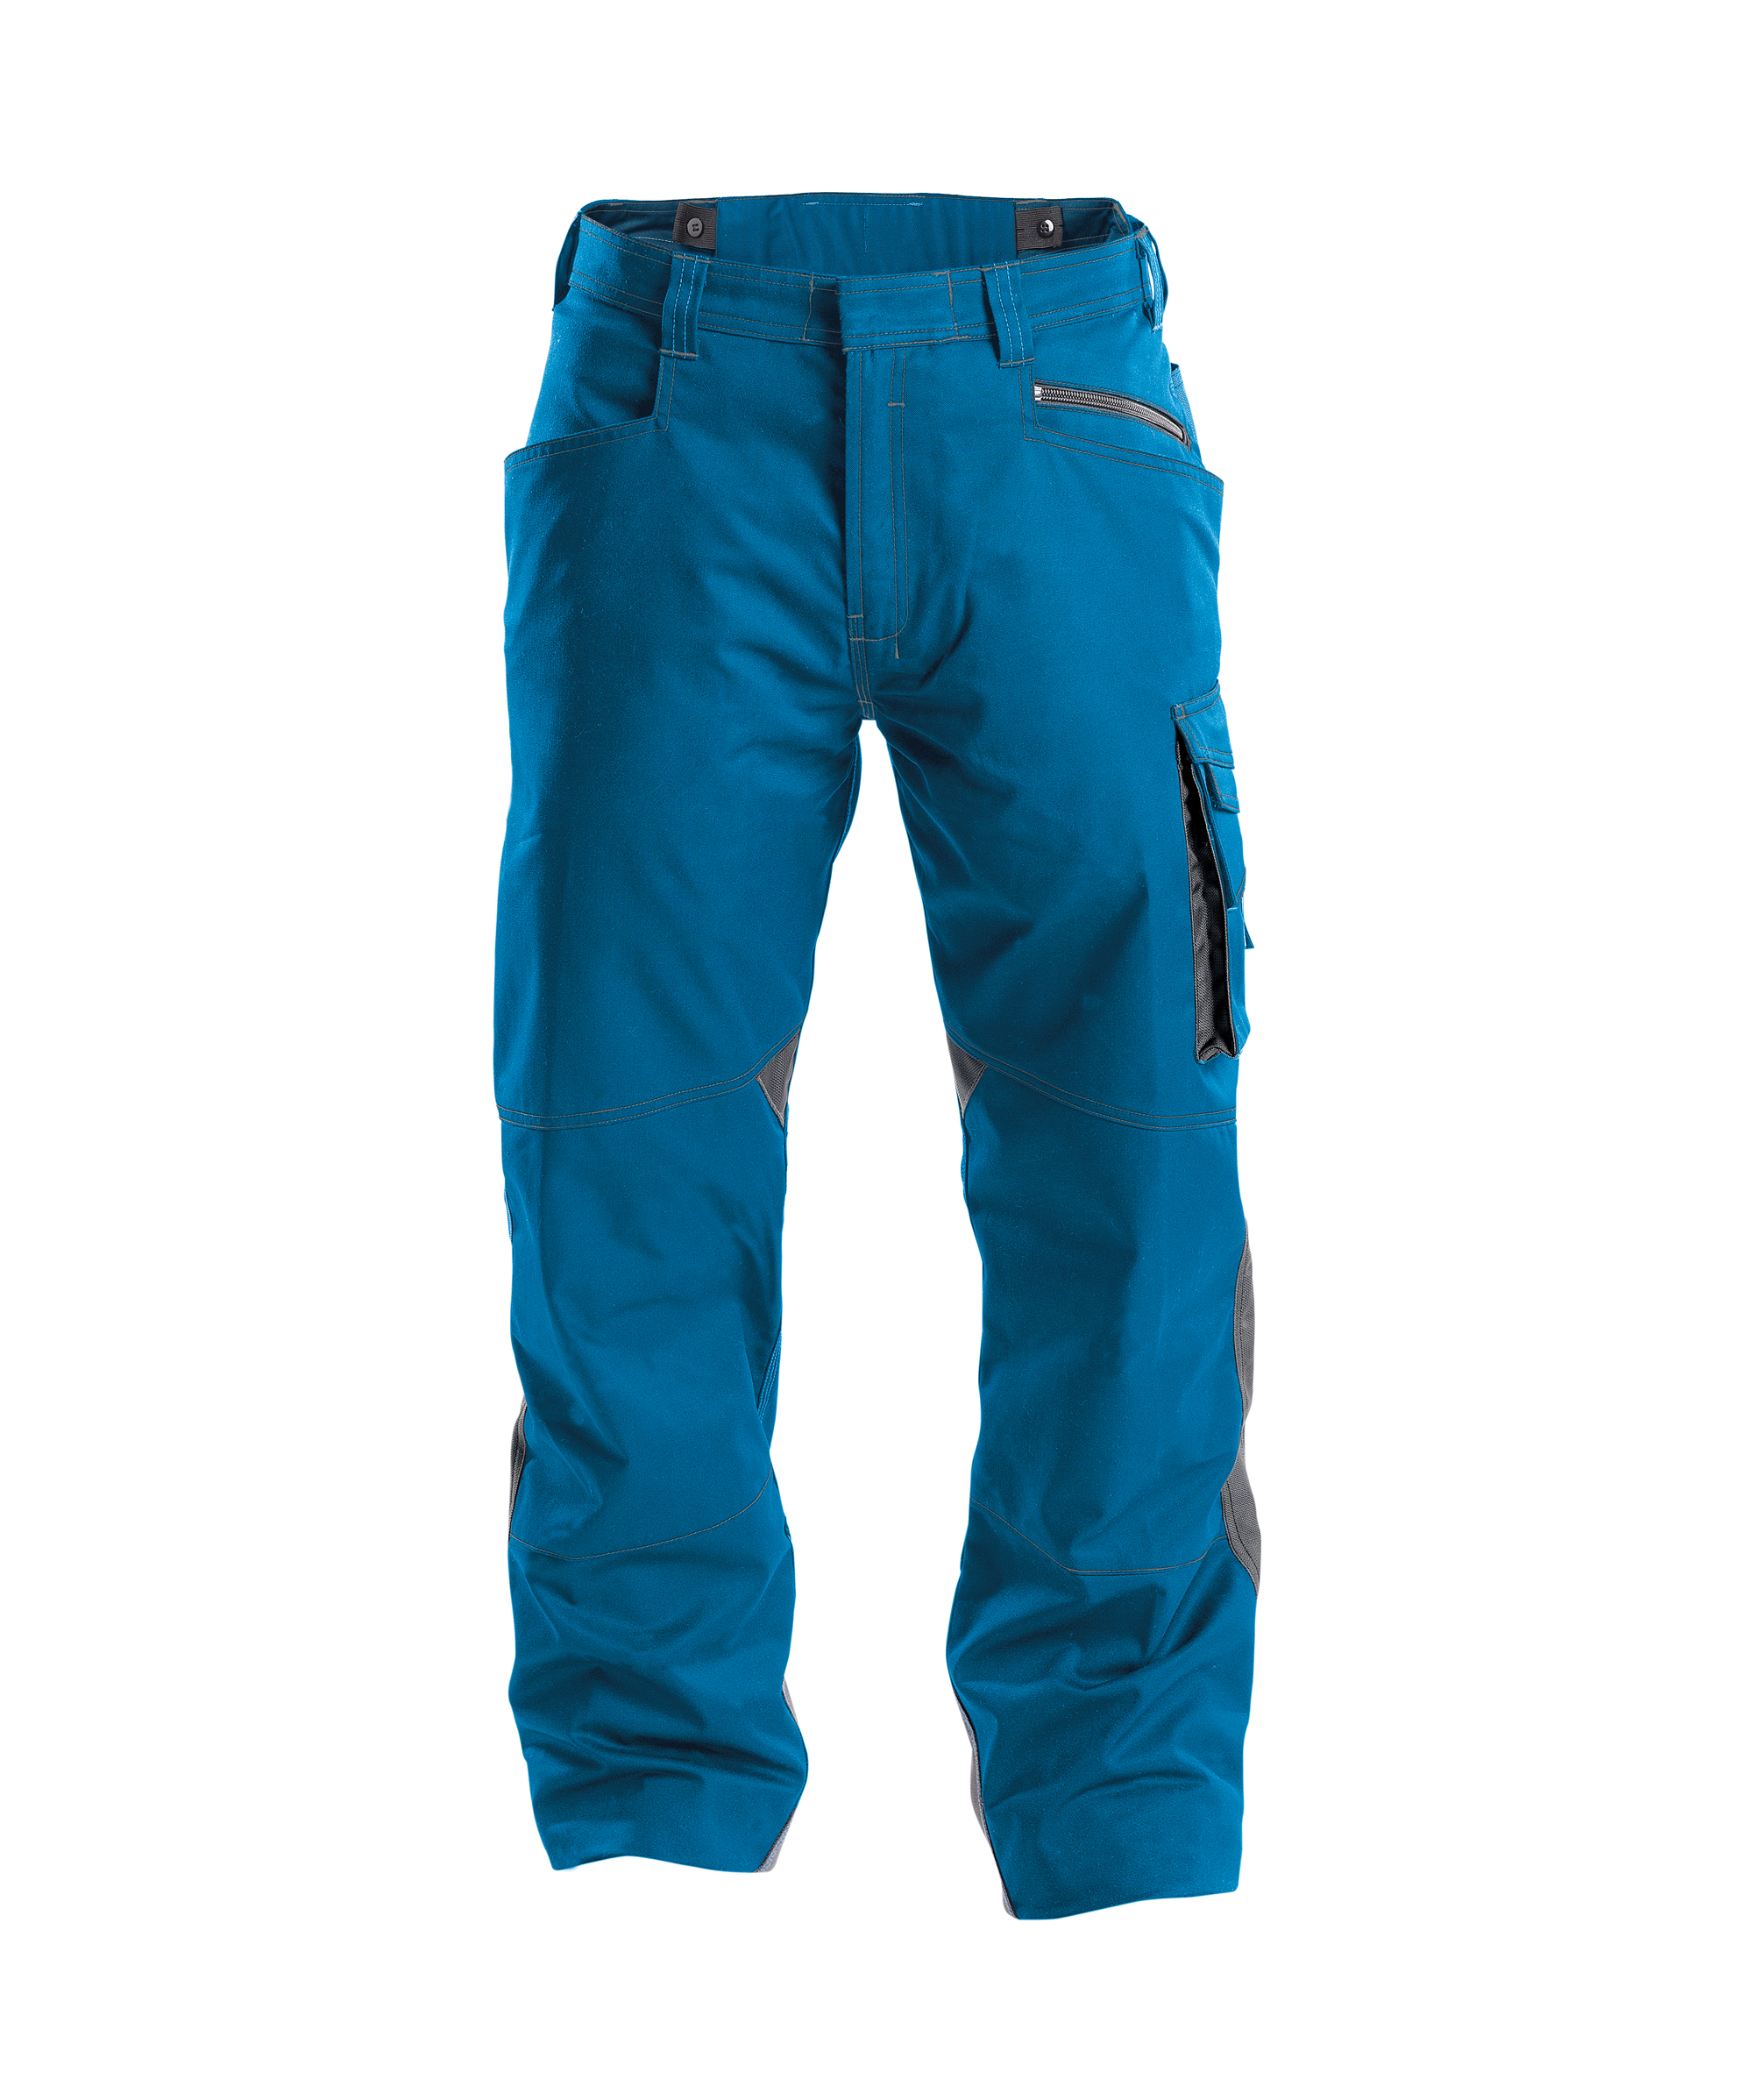 spectrum_two-tone-work-trousers_azure-blue-anthracite-grey_front.jpg